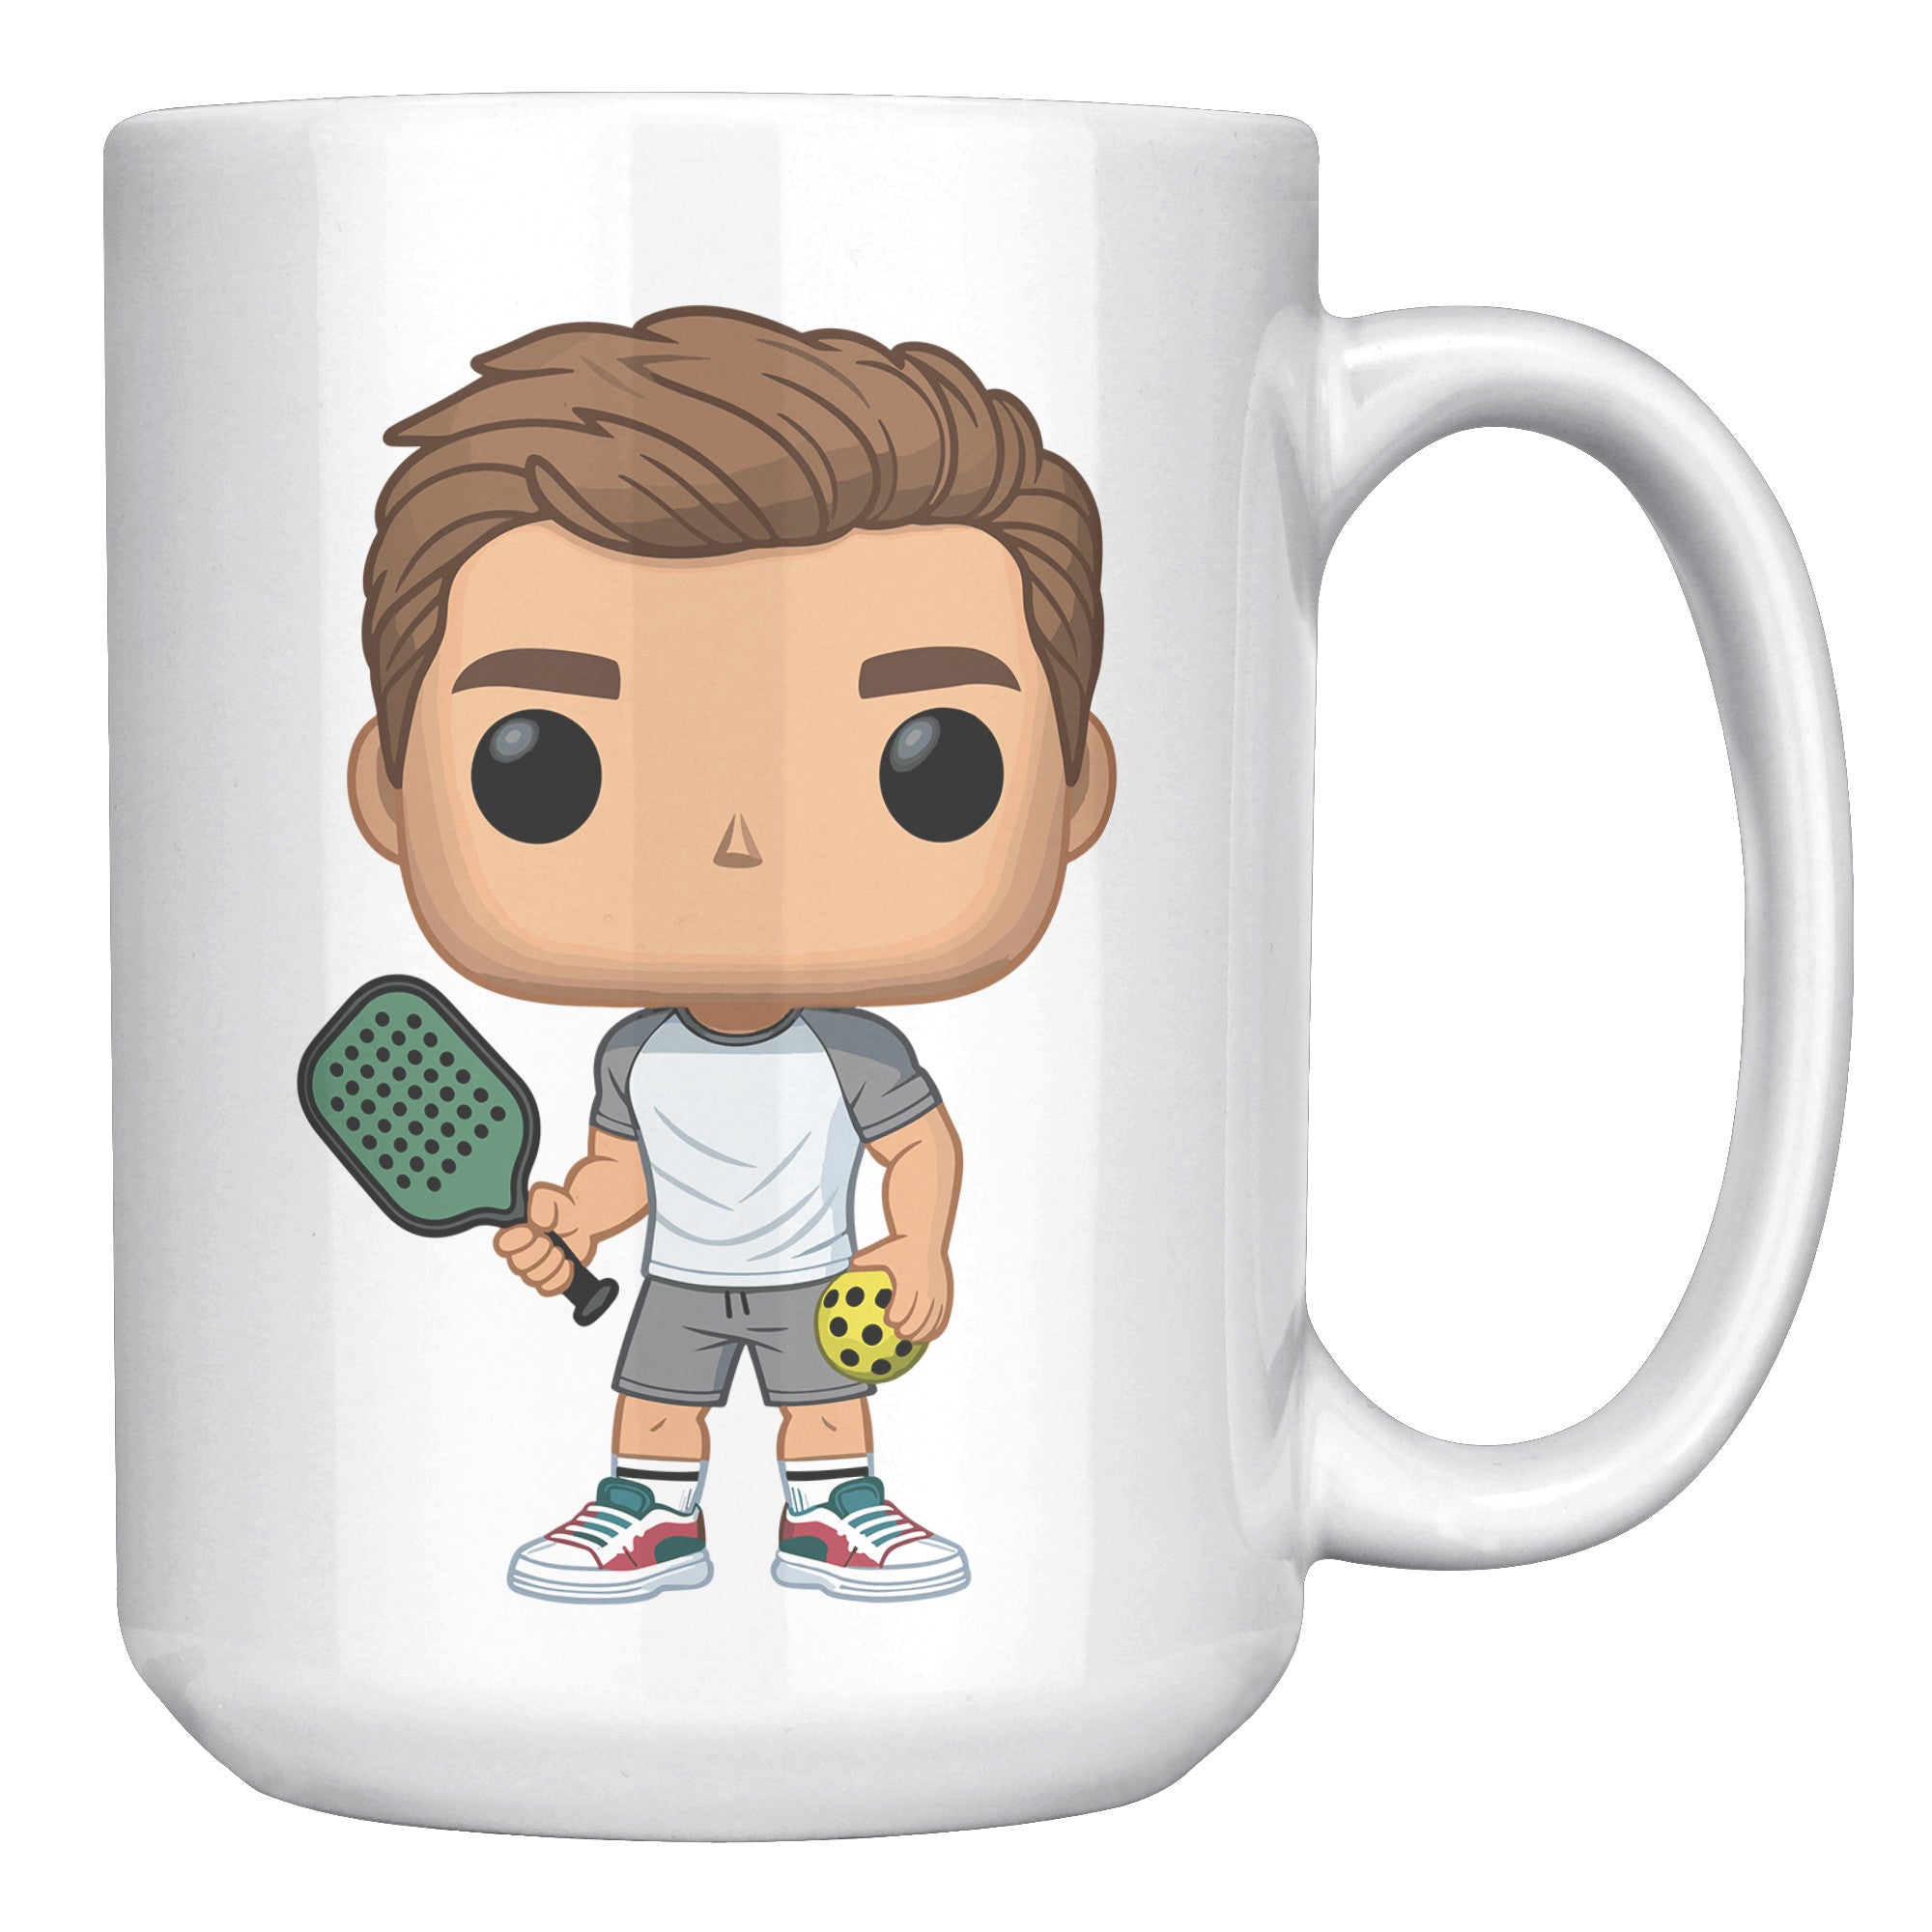 "Funko Pop Style Pickle Ball Player Boy Coffee Mug - Cute Athletic Cup - Perfect Gift for Pickle Ball Enthusiasts - Sporty Boy Apparel" - C1